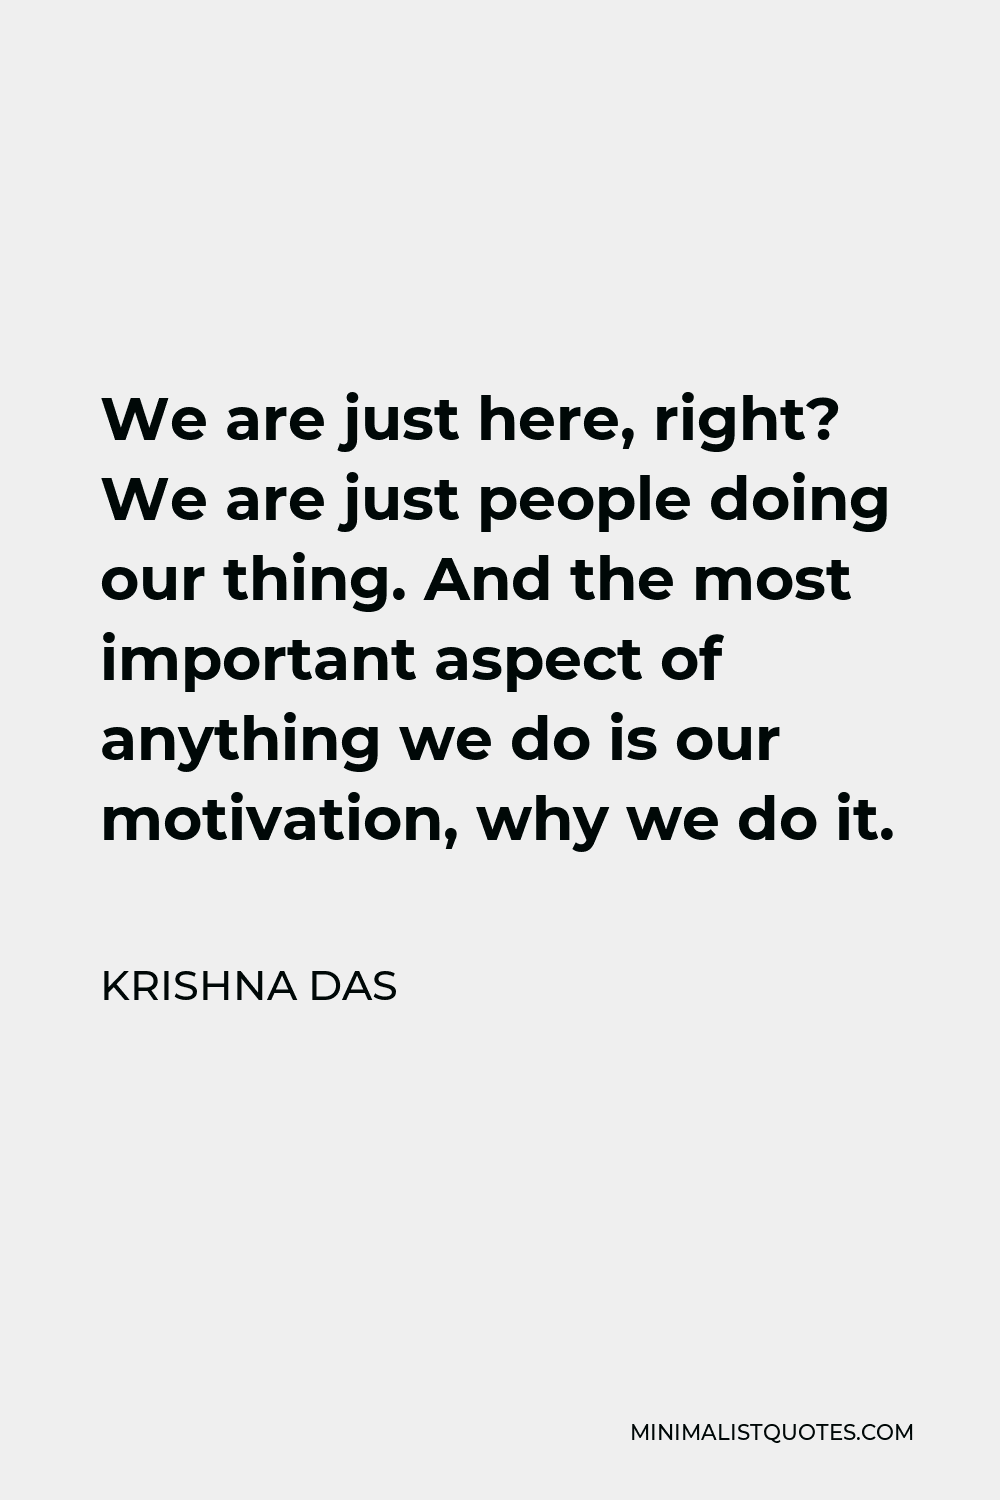 Krishna Das Quote - We are just here, right? We are just people doing our thing. And the most important aspect of anything we do is our motivation, why we do it.